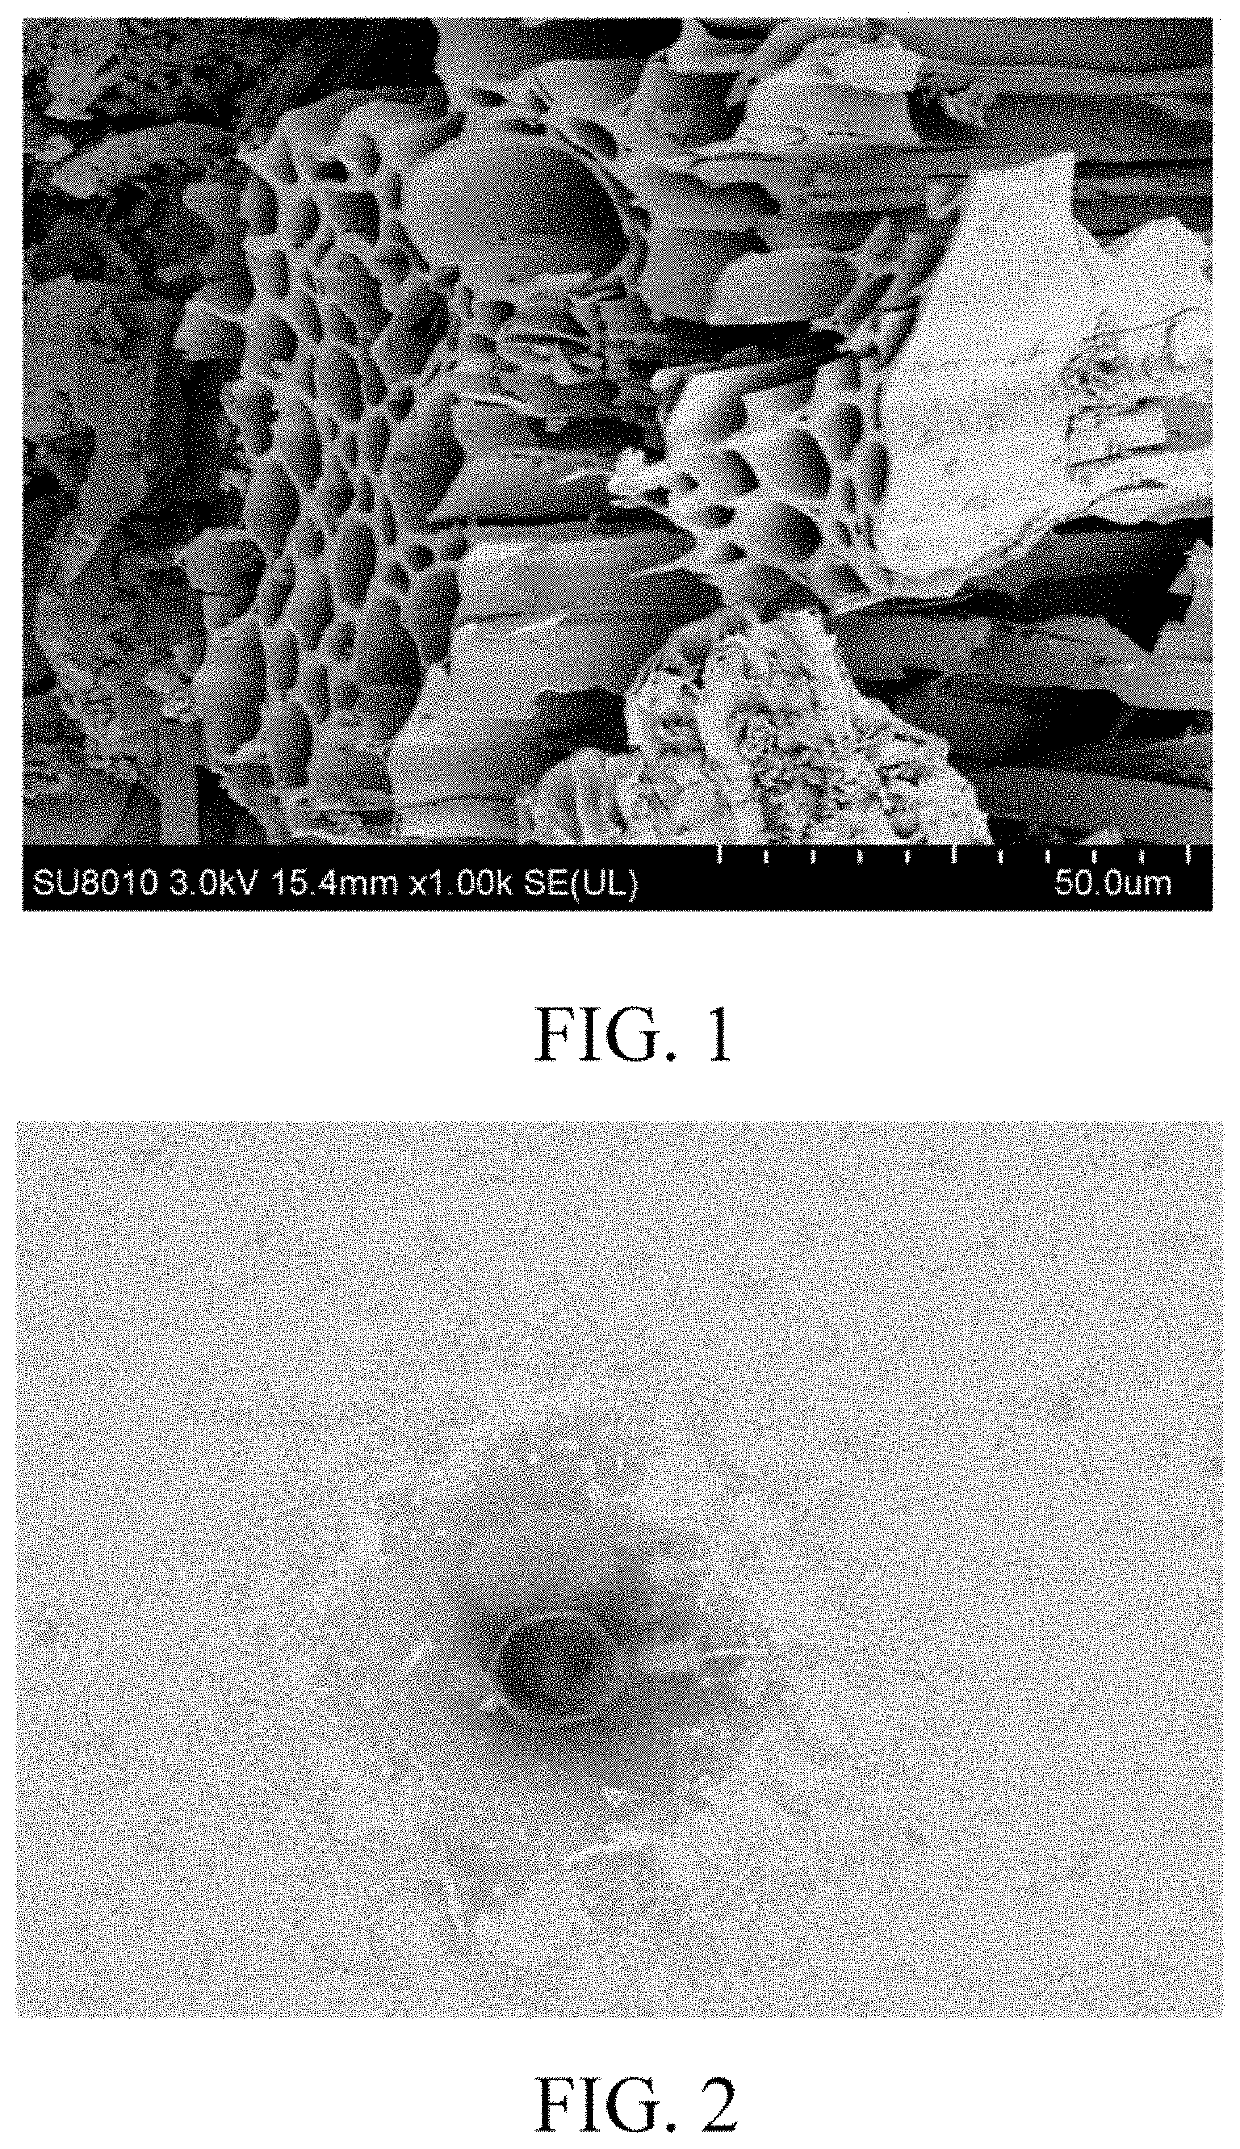 Phage and use thereof in soil remediation